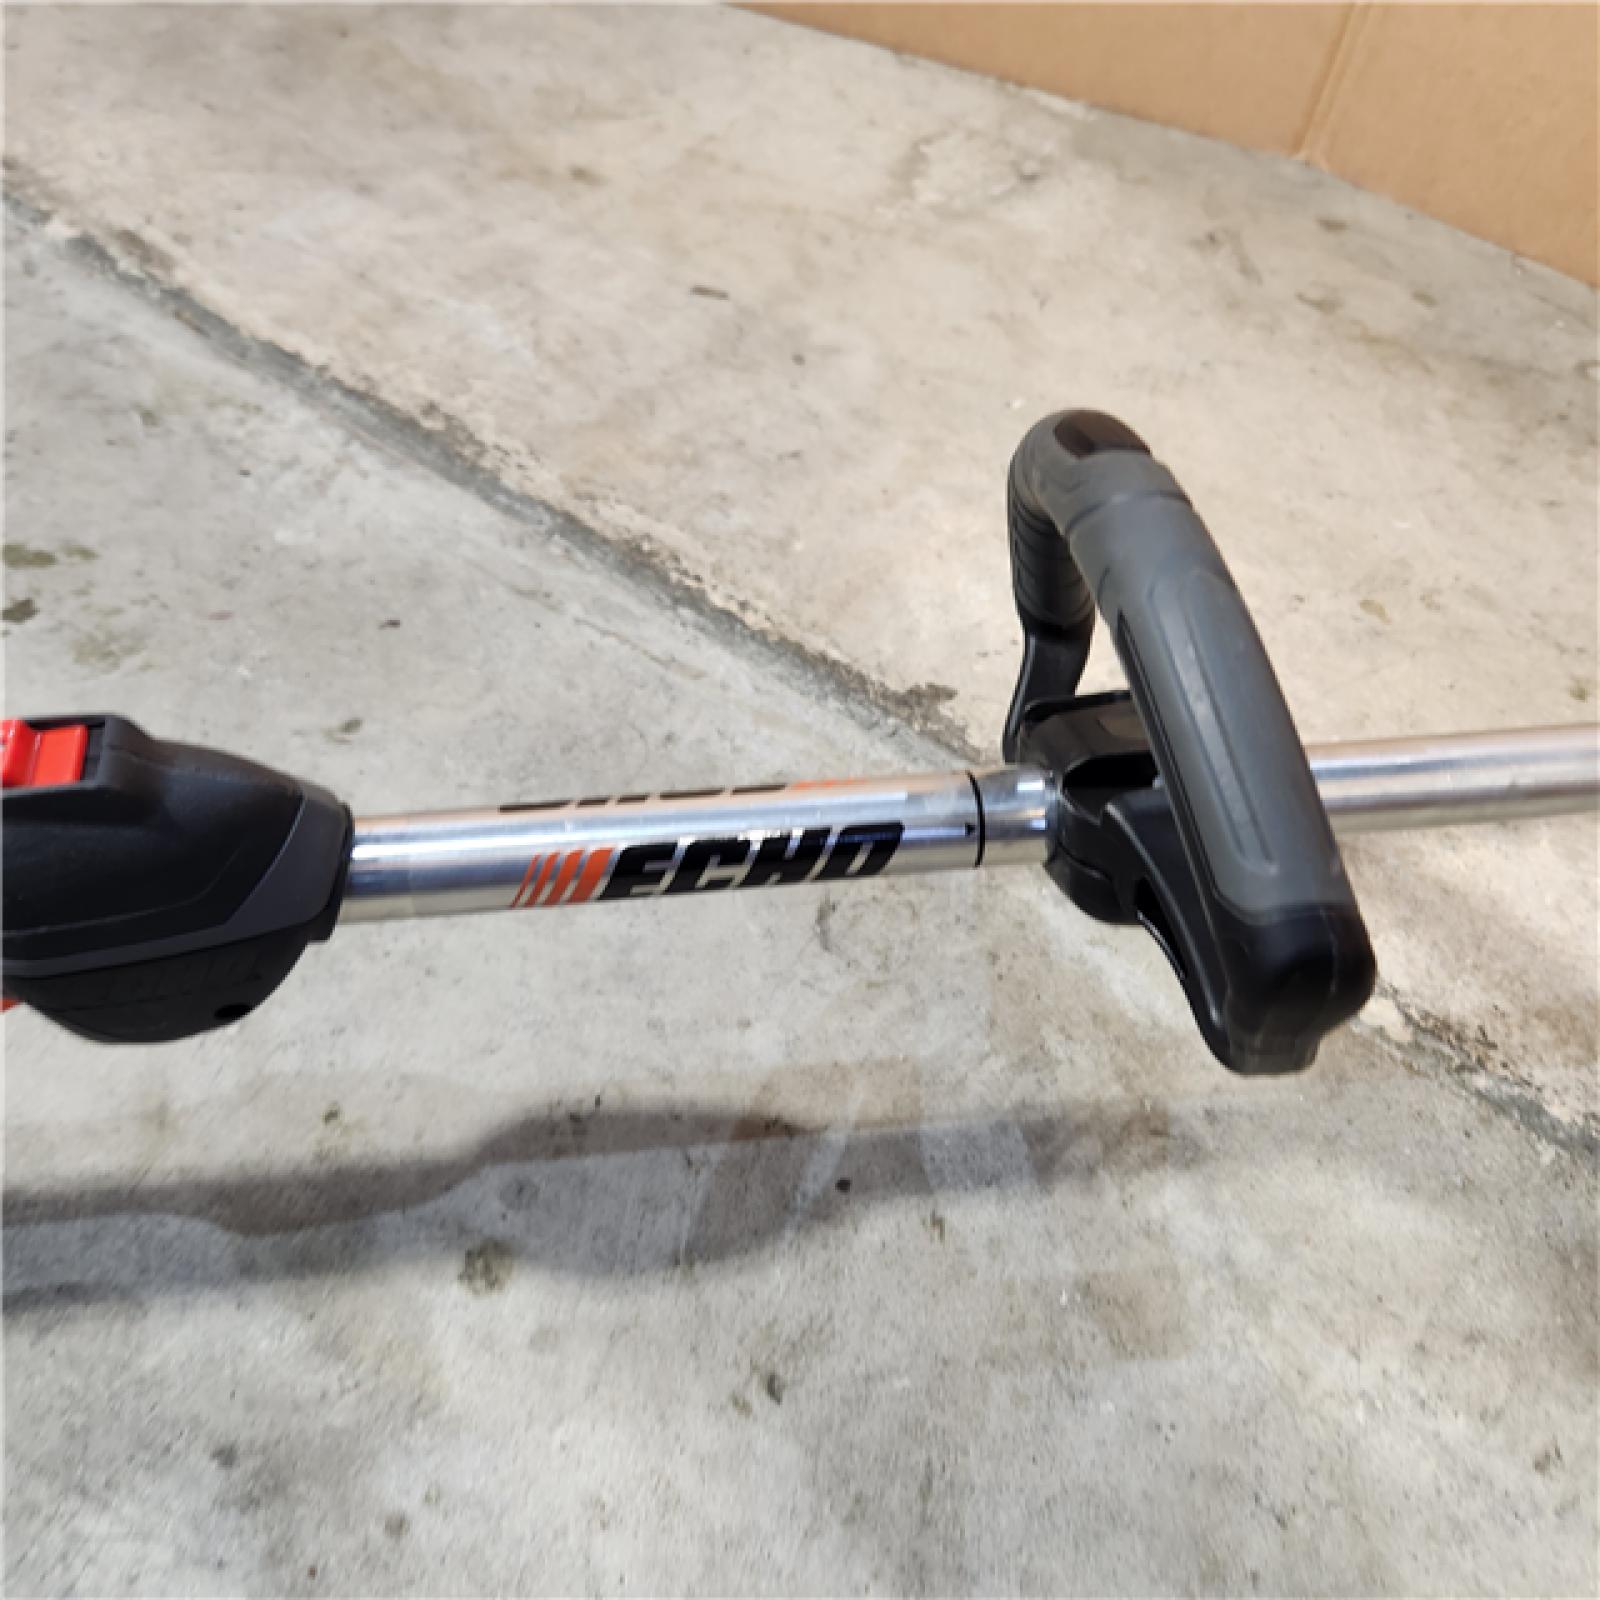 Houston location- AS-IS Echo SRM-225 21.2cc 2 Stroke Fuel Efficient Durable Gas Straight Shaft Trimmer Appears in new condition